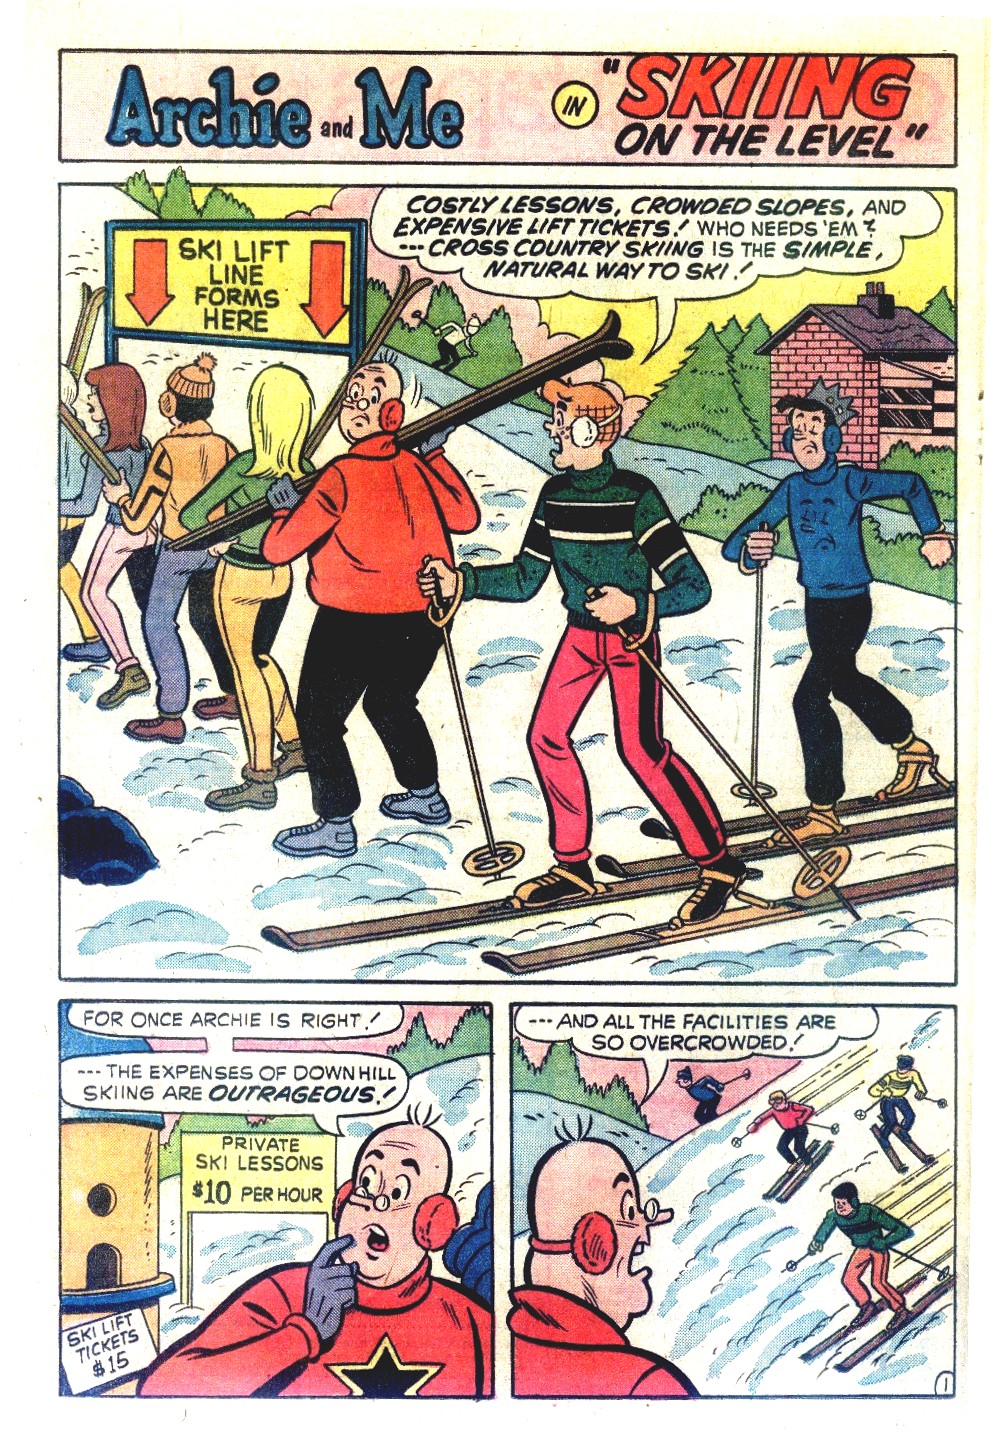 Read online Archie and Me comic -  Issue #63 - 28